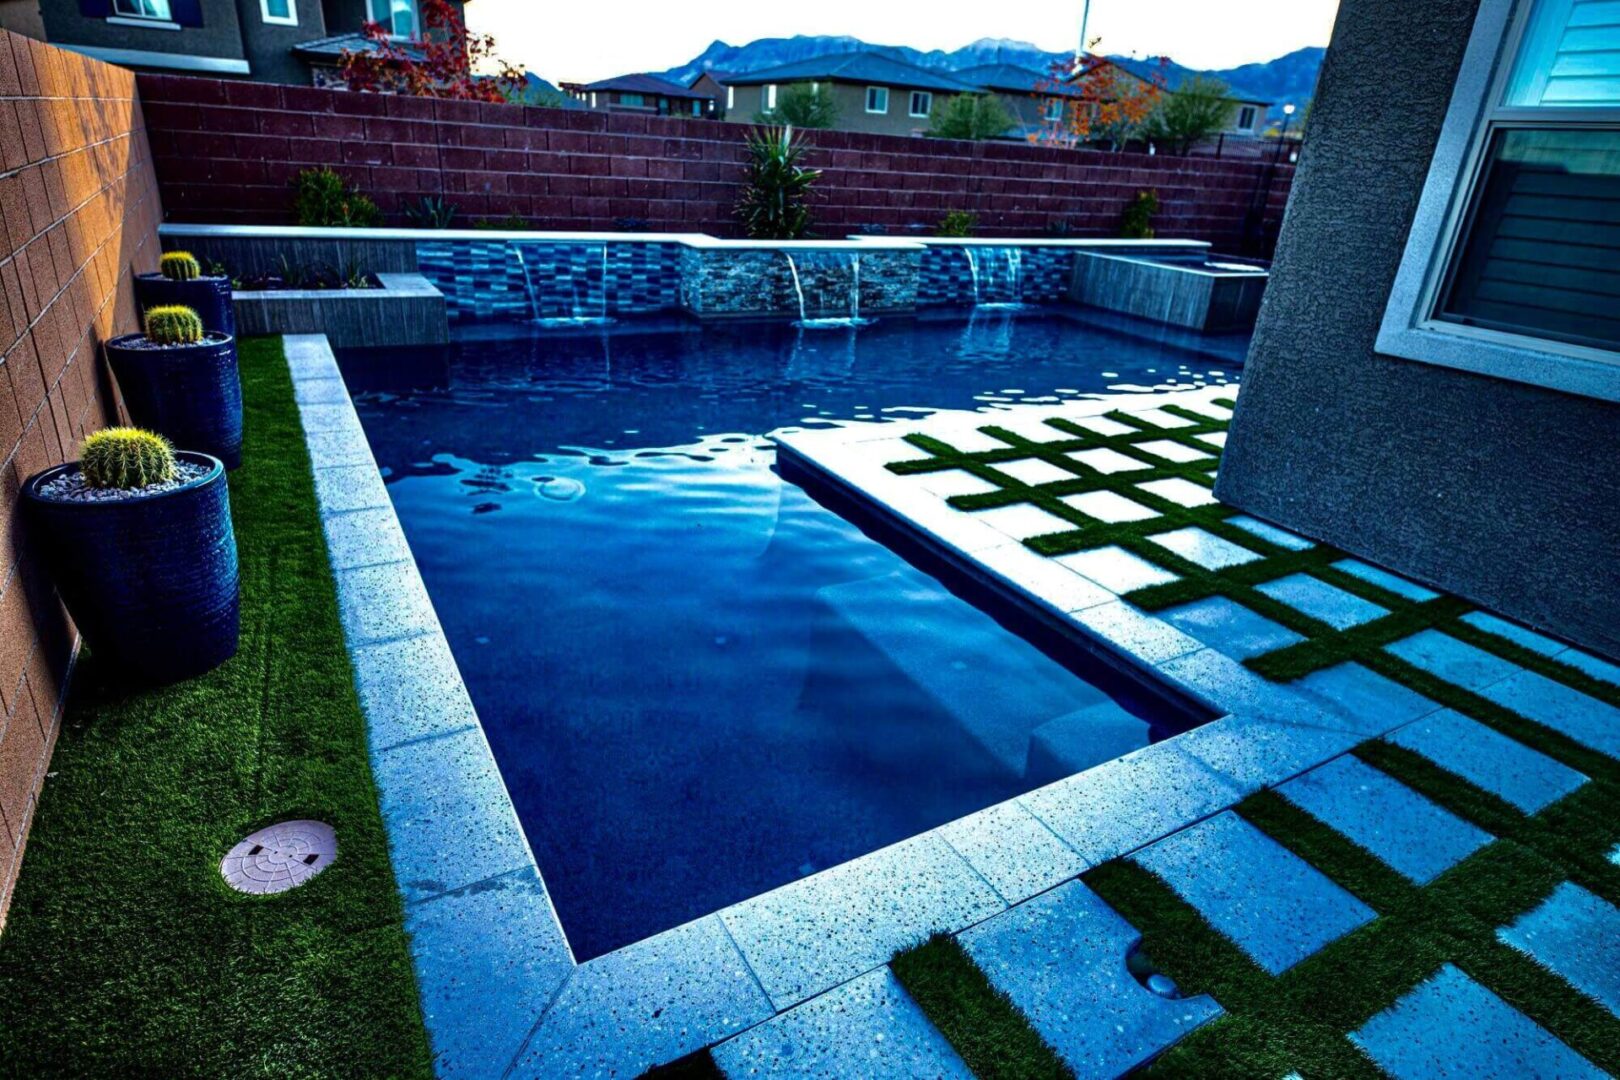 A pool with a tile border and grass on the ground.